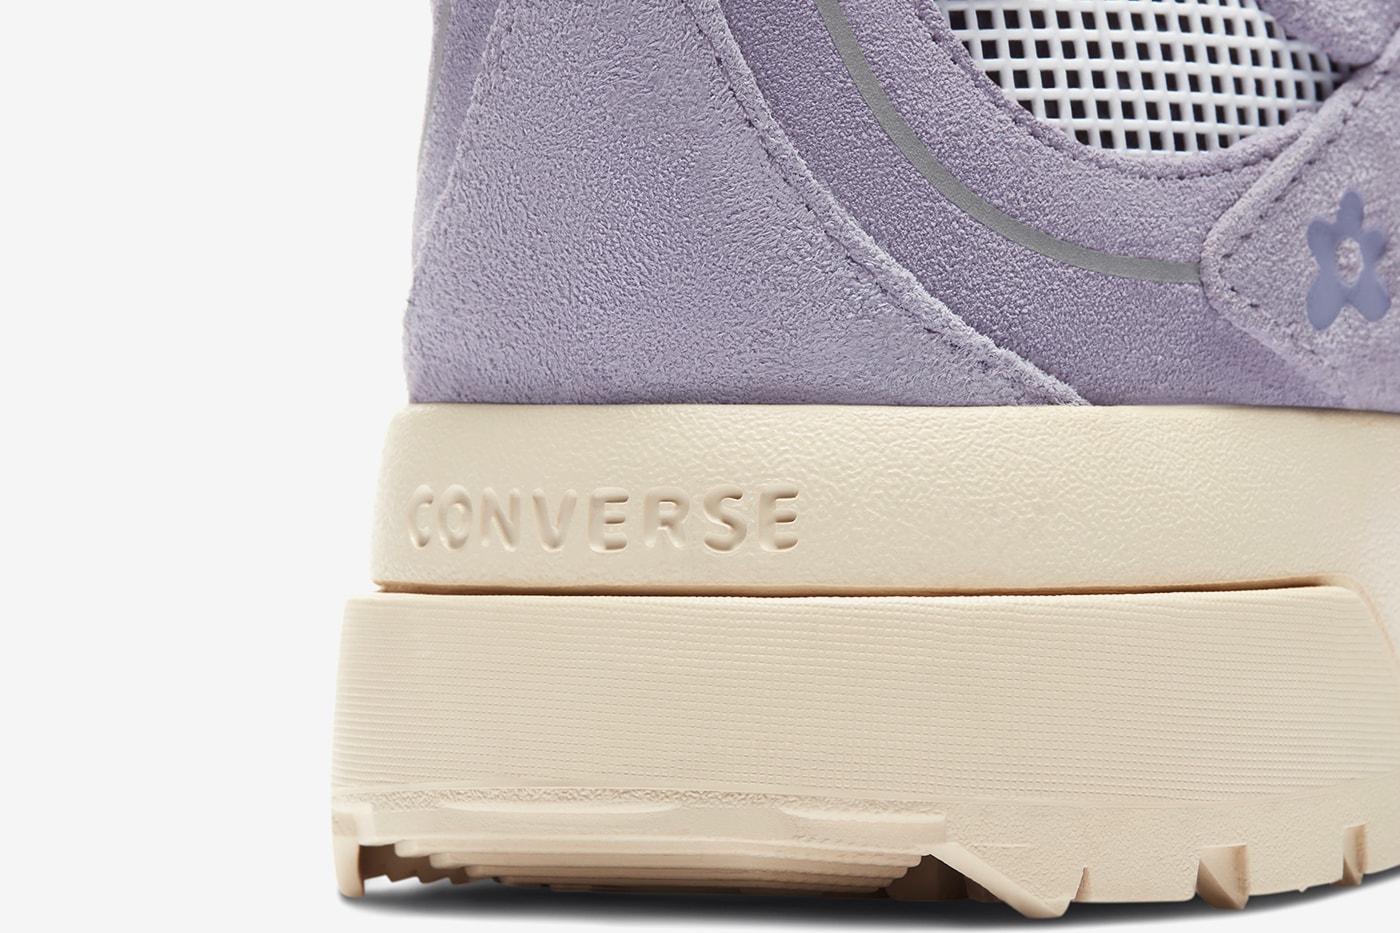 Converse GOLF le FLEUR Gianno Suede menswear streetwear fall winter 2020 collection tyler the creator rapper hip hop artist collaboration shoes footwear sneakers trainers trail runners